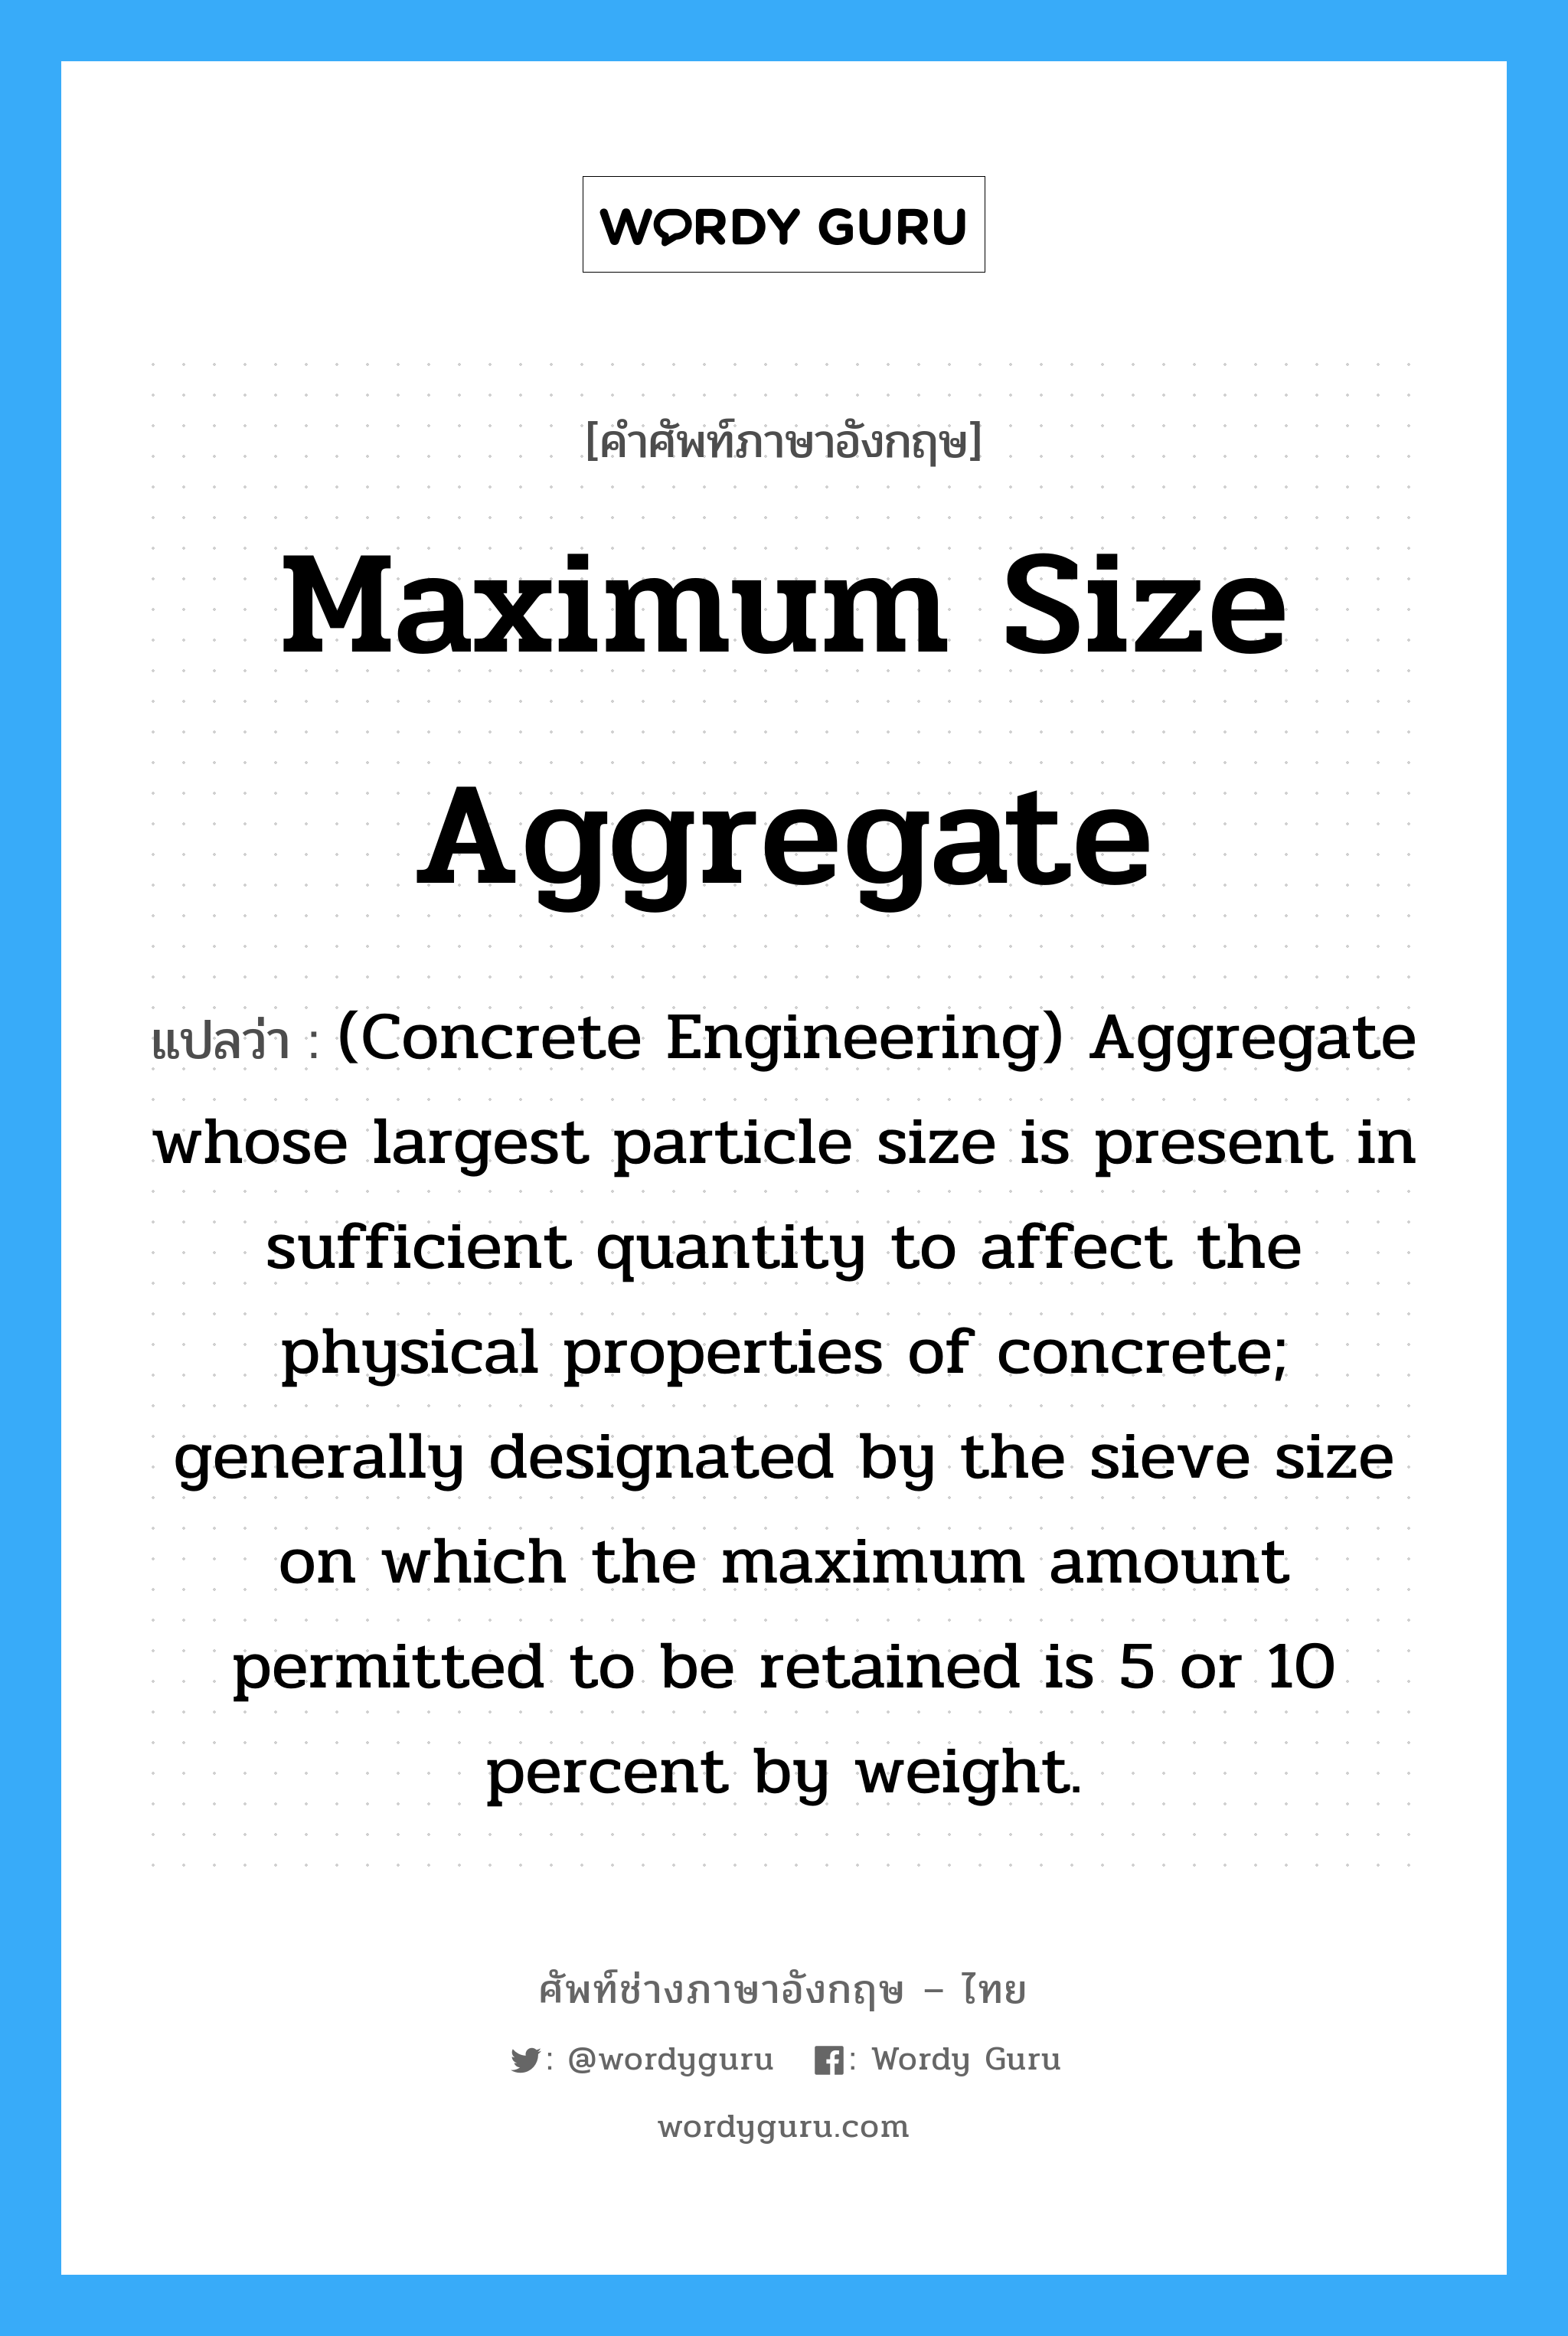 Maximum Size Aggregate แปลว่า?, คำศัพท์ช่างภาษาอังกฤษ - ไทย Maximum Size Aggregate คำศัพท์ภาษาอังกฤษ Maximum Size Aggregate แปลว่า (Concrete Engineering) Aggregate whose largest particle size is present in sufficient quantity to affect the physical properties of concrete; generally designated by the sieve size on which the maximum amount permitted to be retained is 5 or 10 percent by weight.